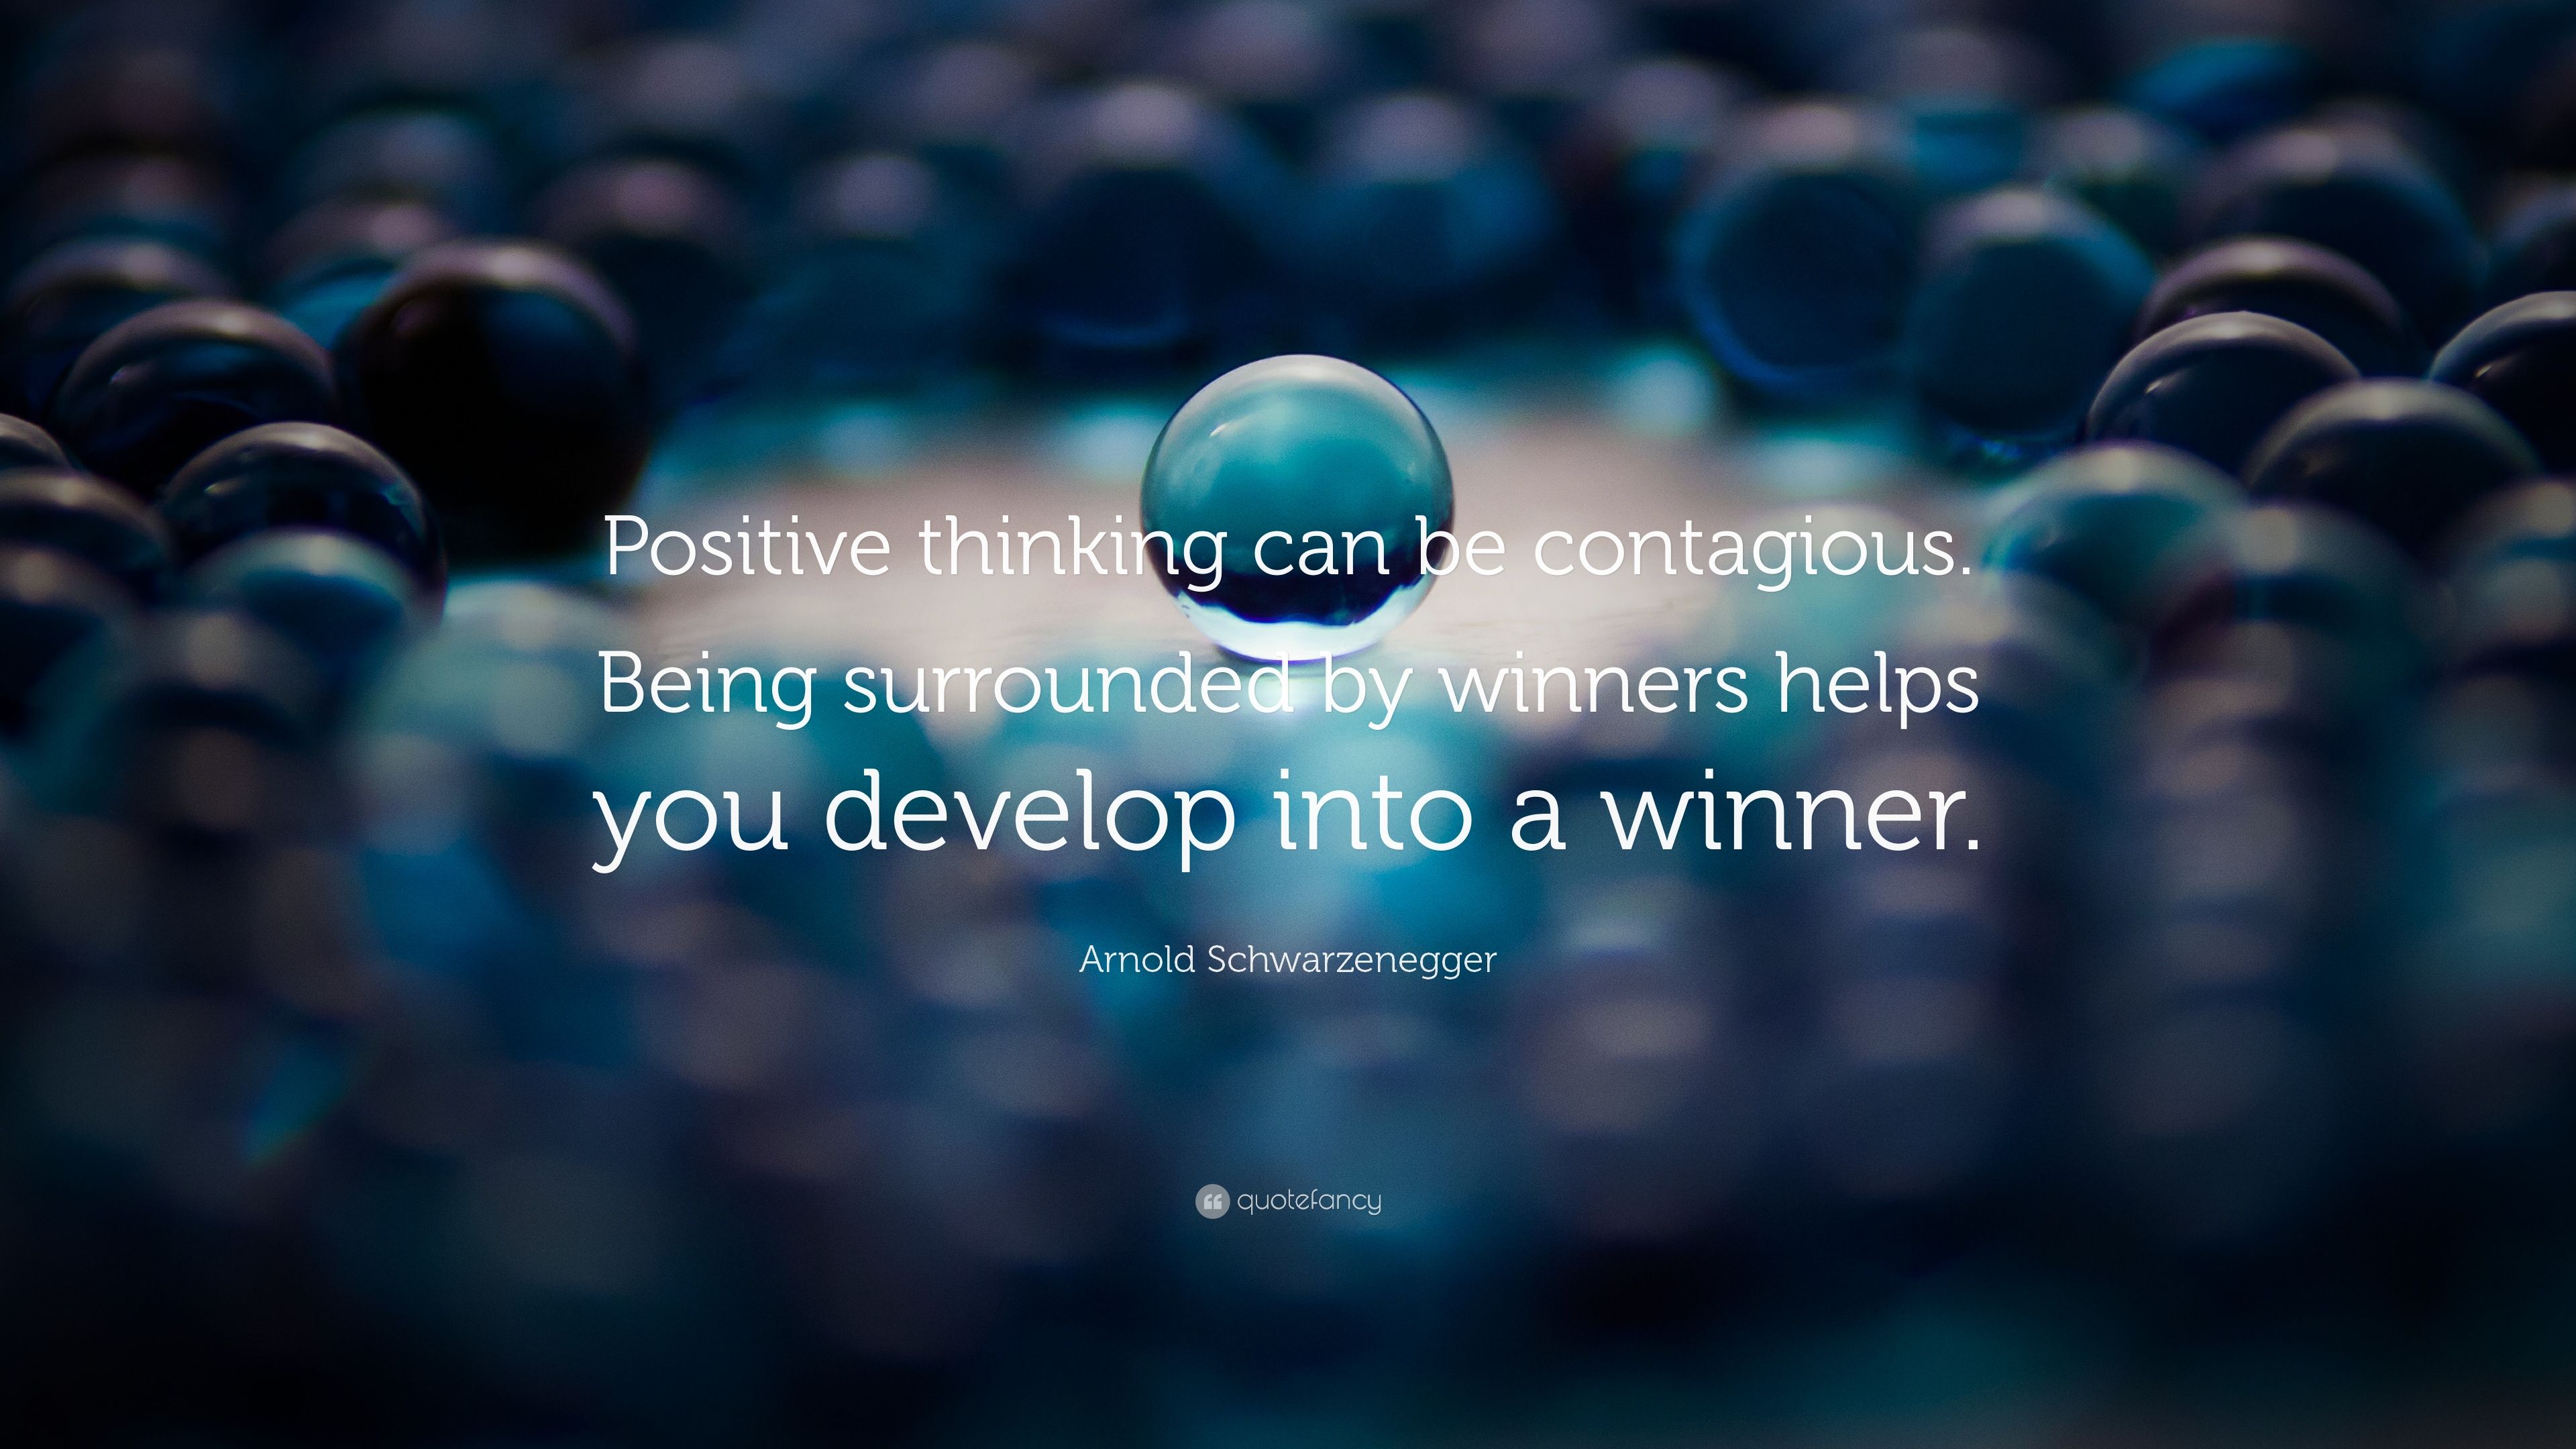 Arnold Schwarzenegger Quote: “Positive thinking can be contagious ...